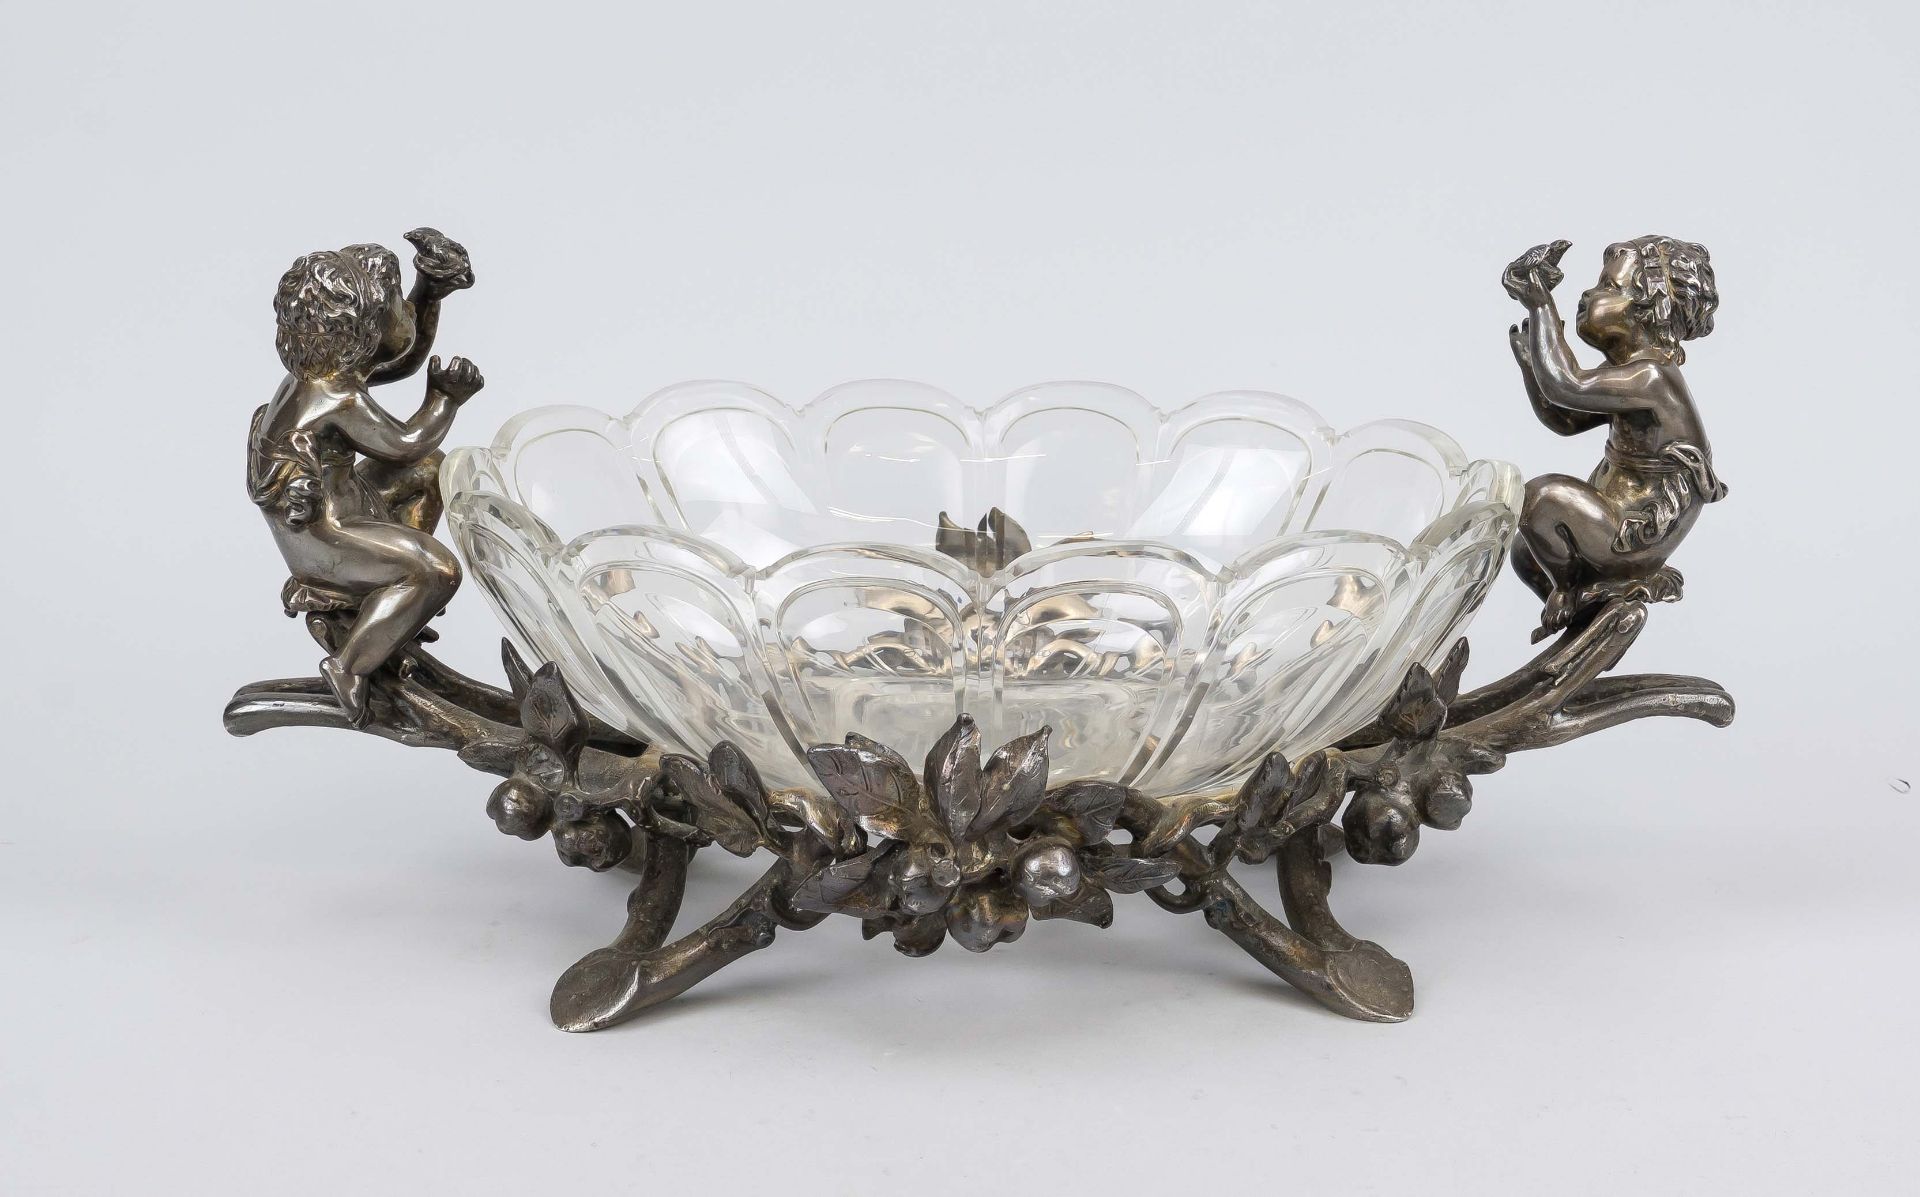 Large centerpiece with putti, 19th century, silver-plated metal with glass bowl. Fully sculpted with